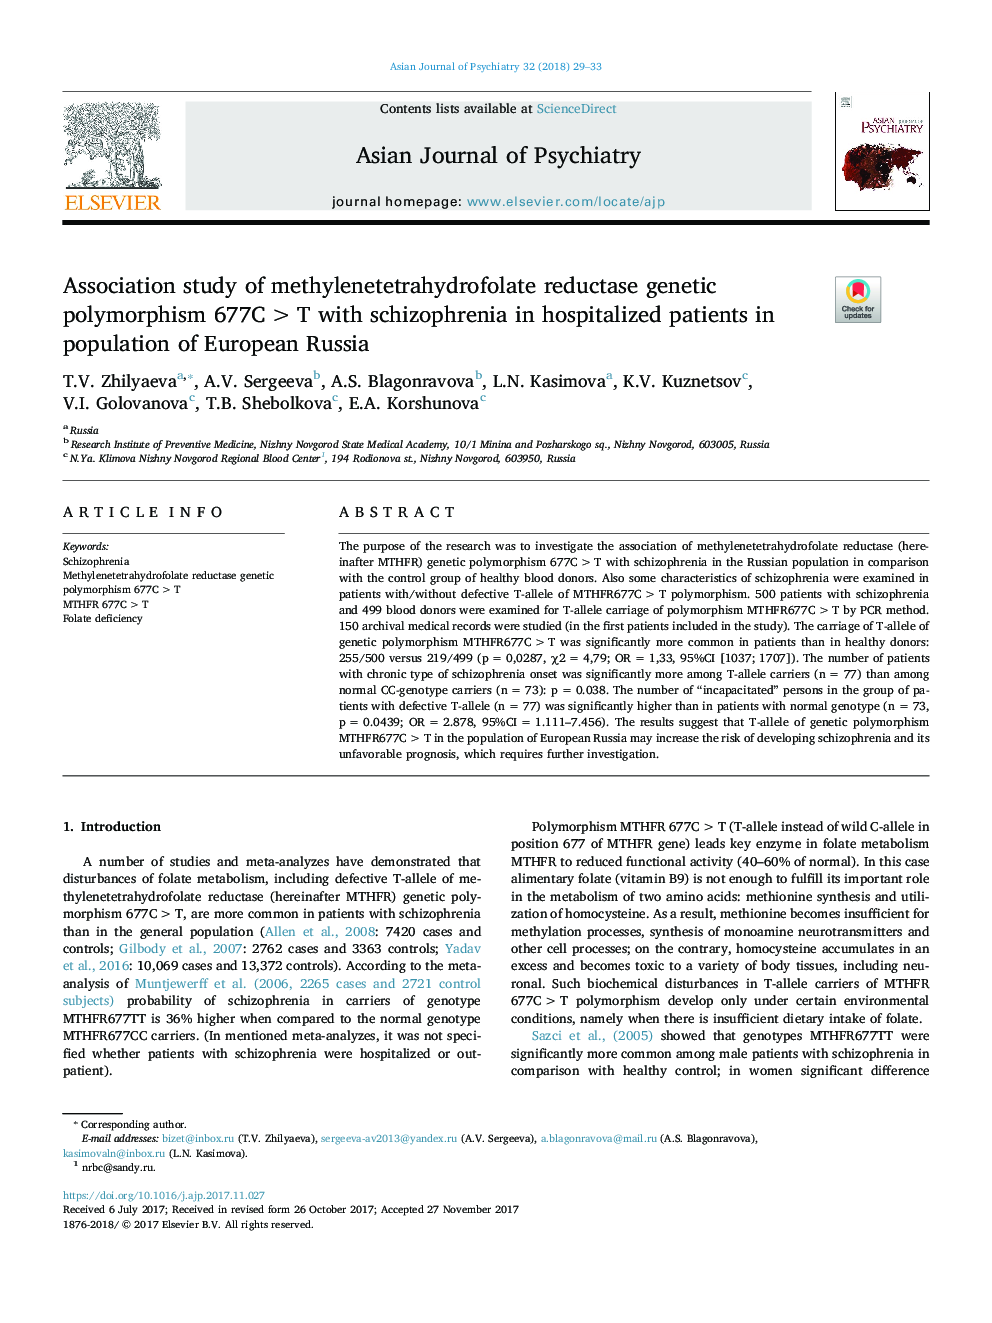 Association study of methylenetetrahydrofolate reductase genetic polymorphism 677C>T with schizophrenia in hospitalized patients in population of European Russia